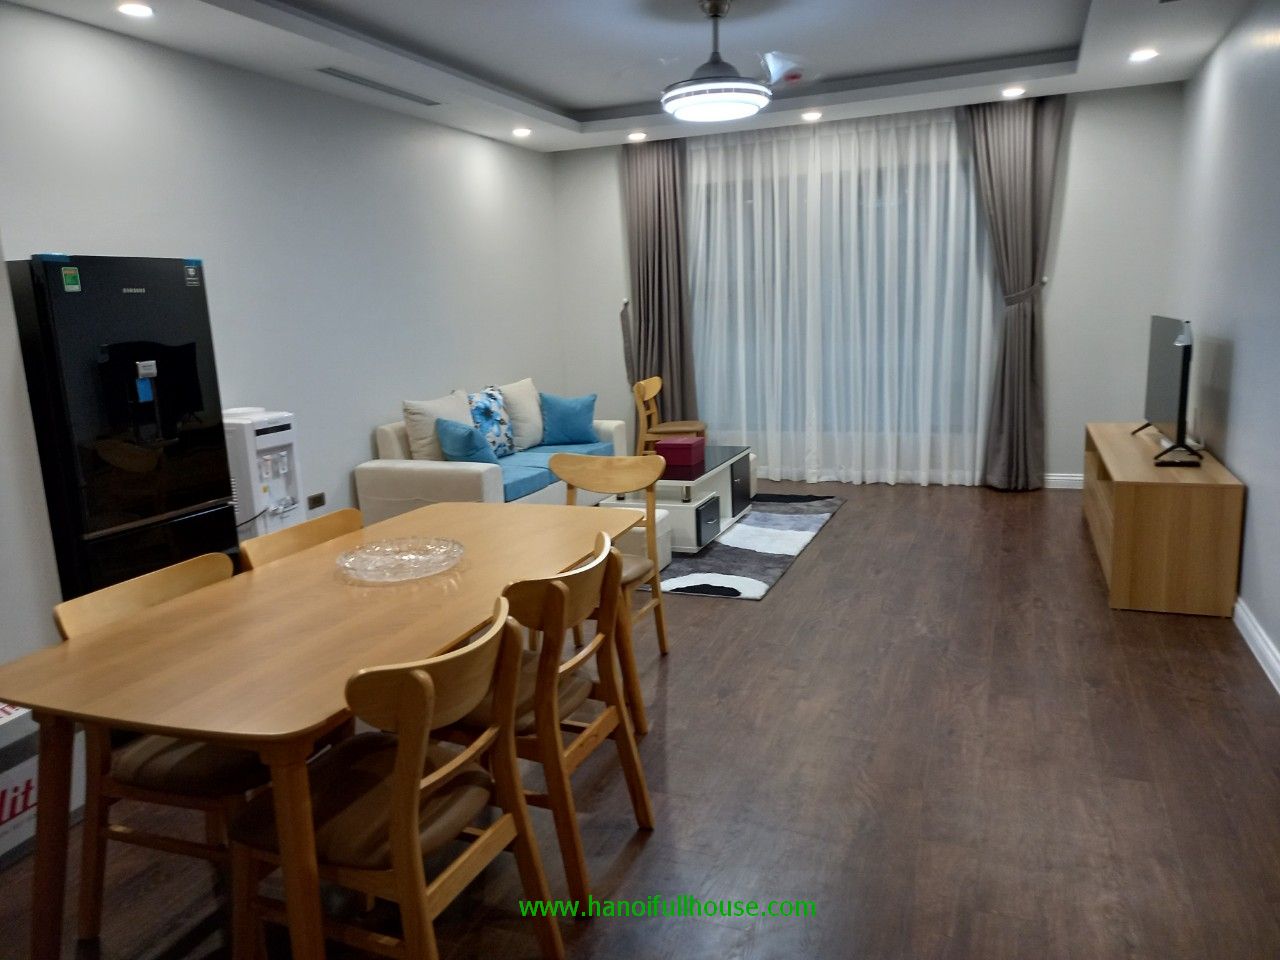 Tay Ho Residence-HDI Building to let for rent 3 bedroom apartment